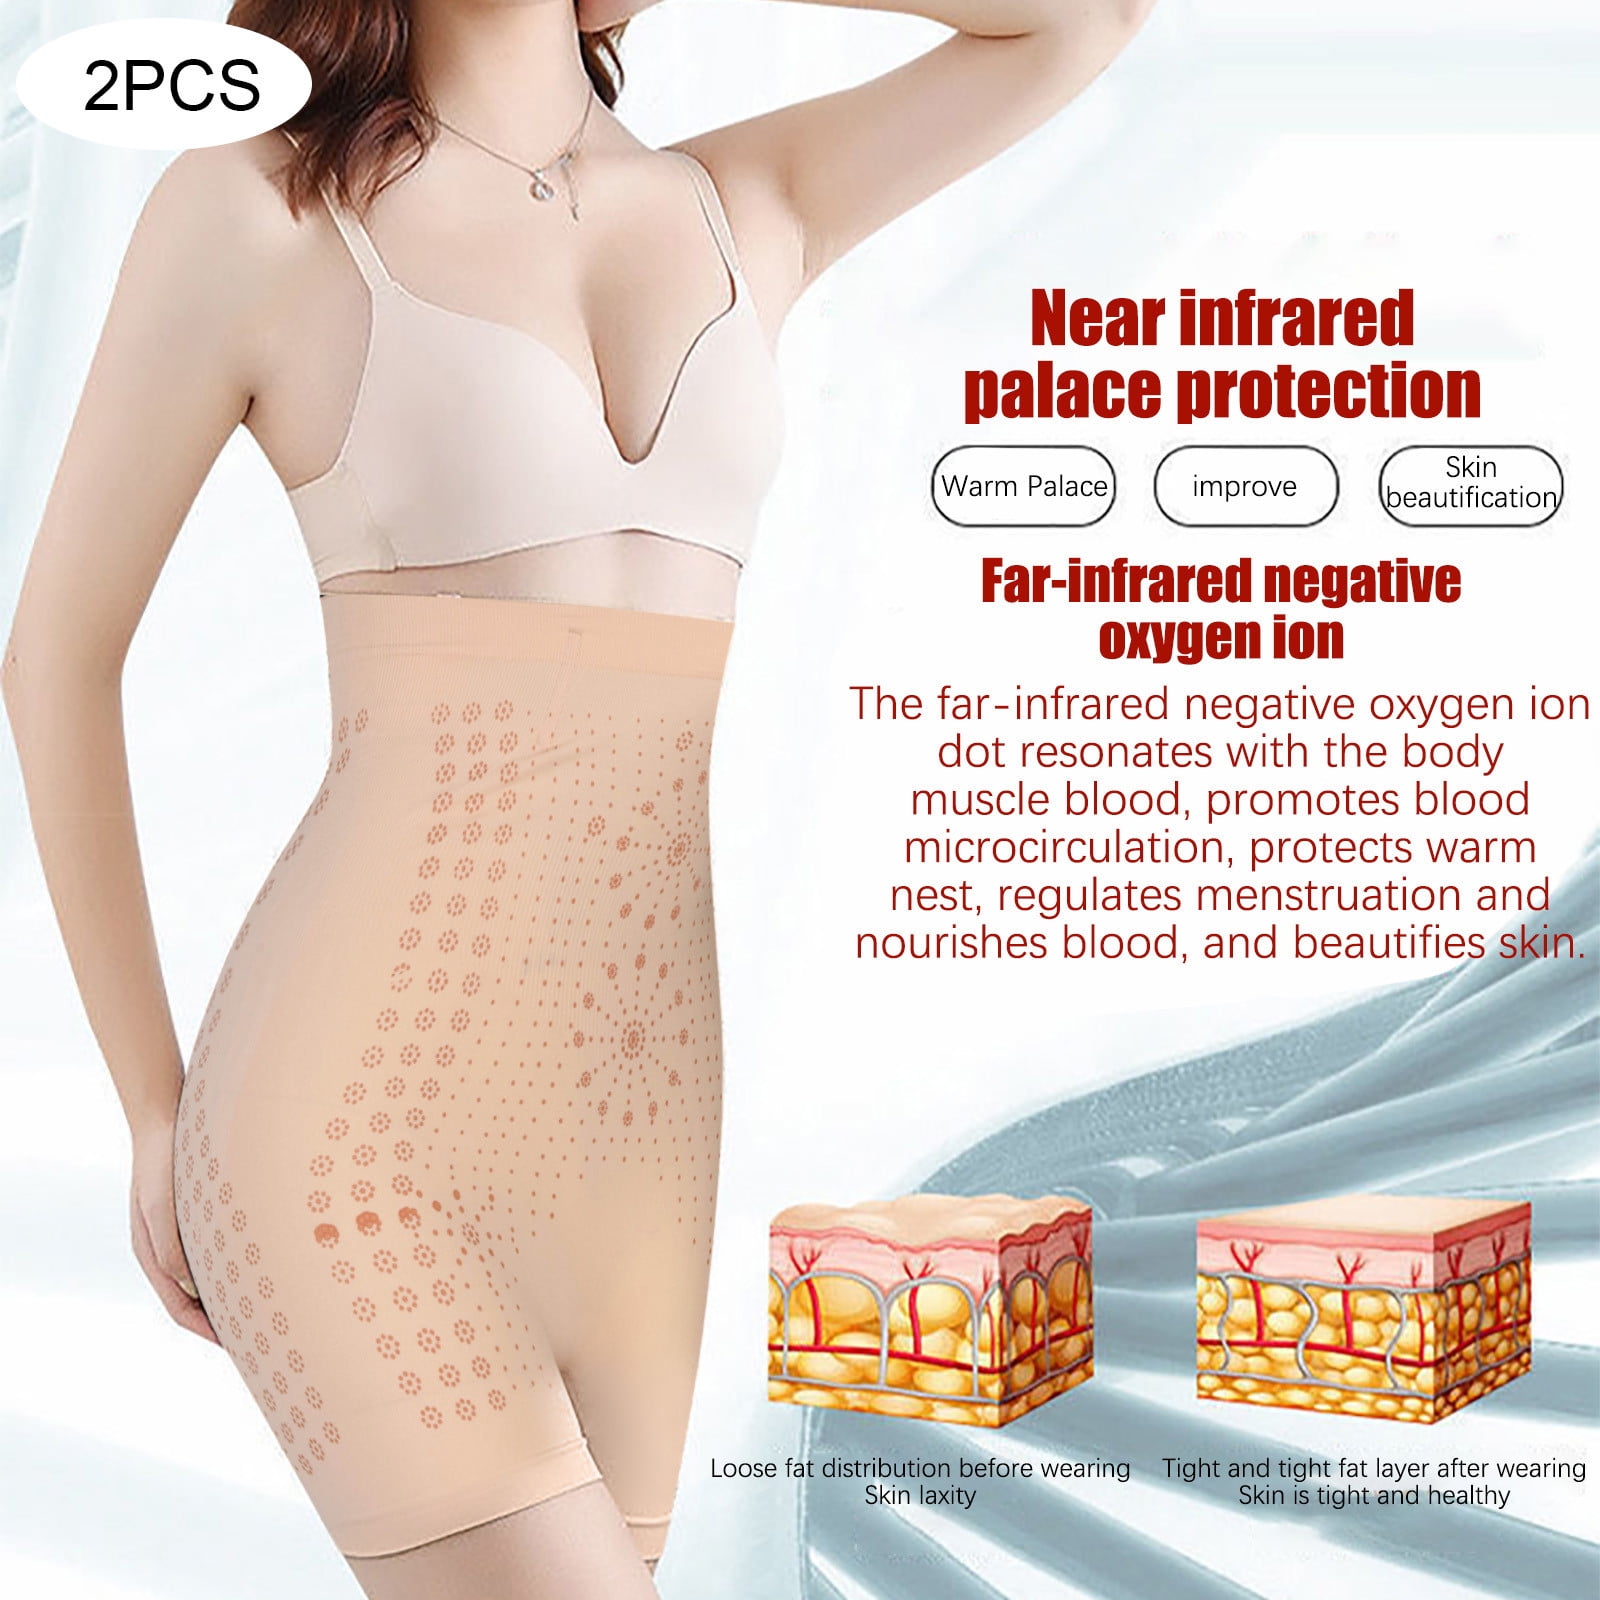 Find Cheap, Fashionable and Slimming infrared shapewear 